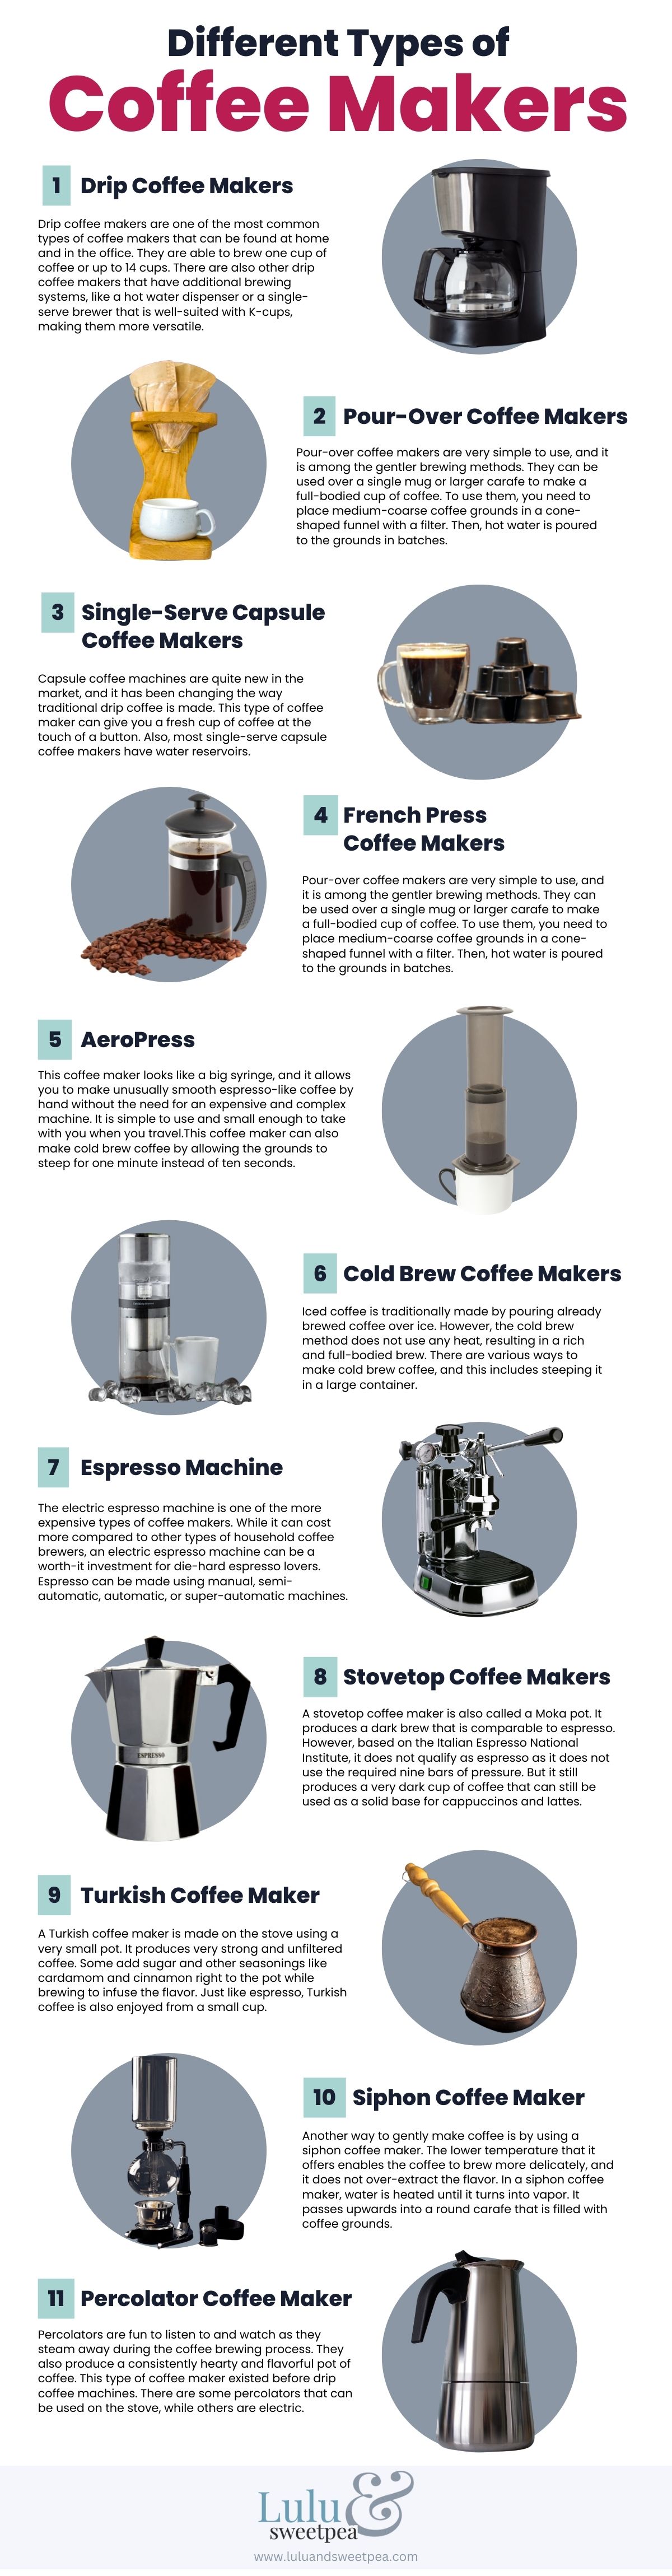 Different Types of Coffee Makers